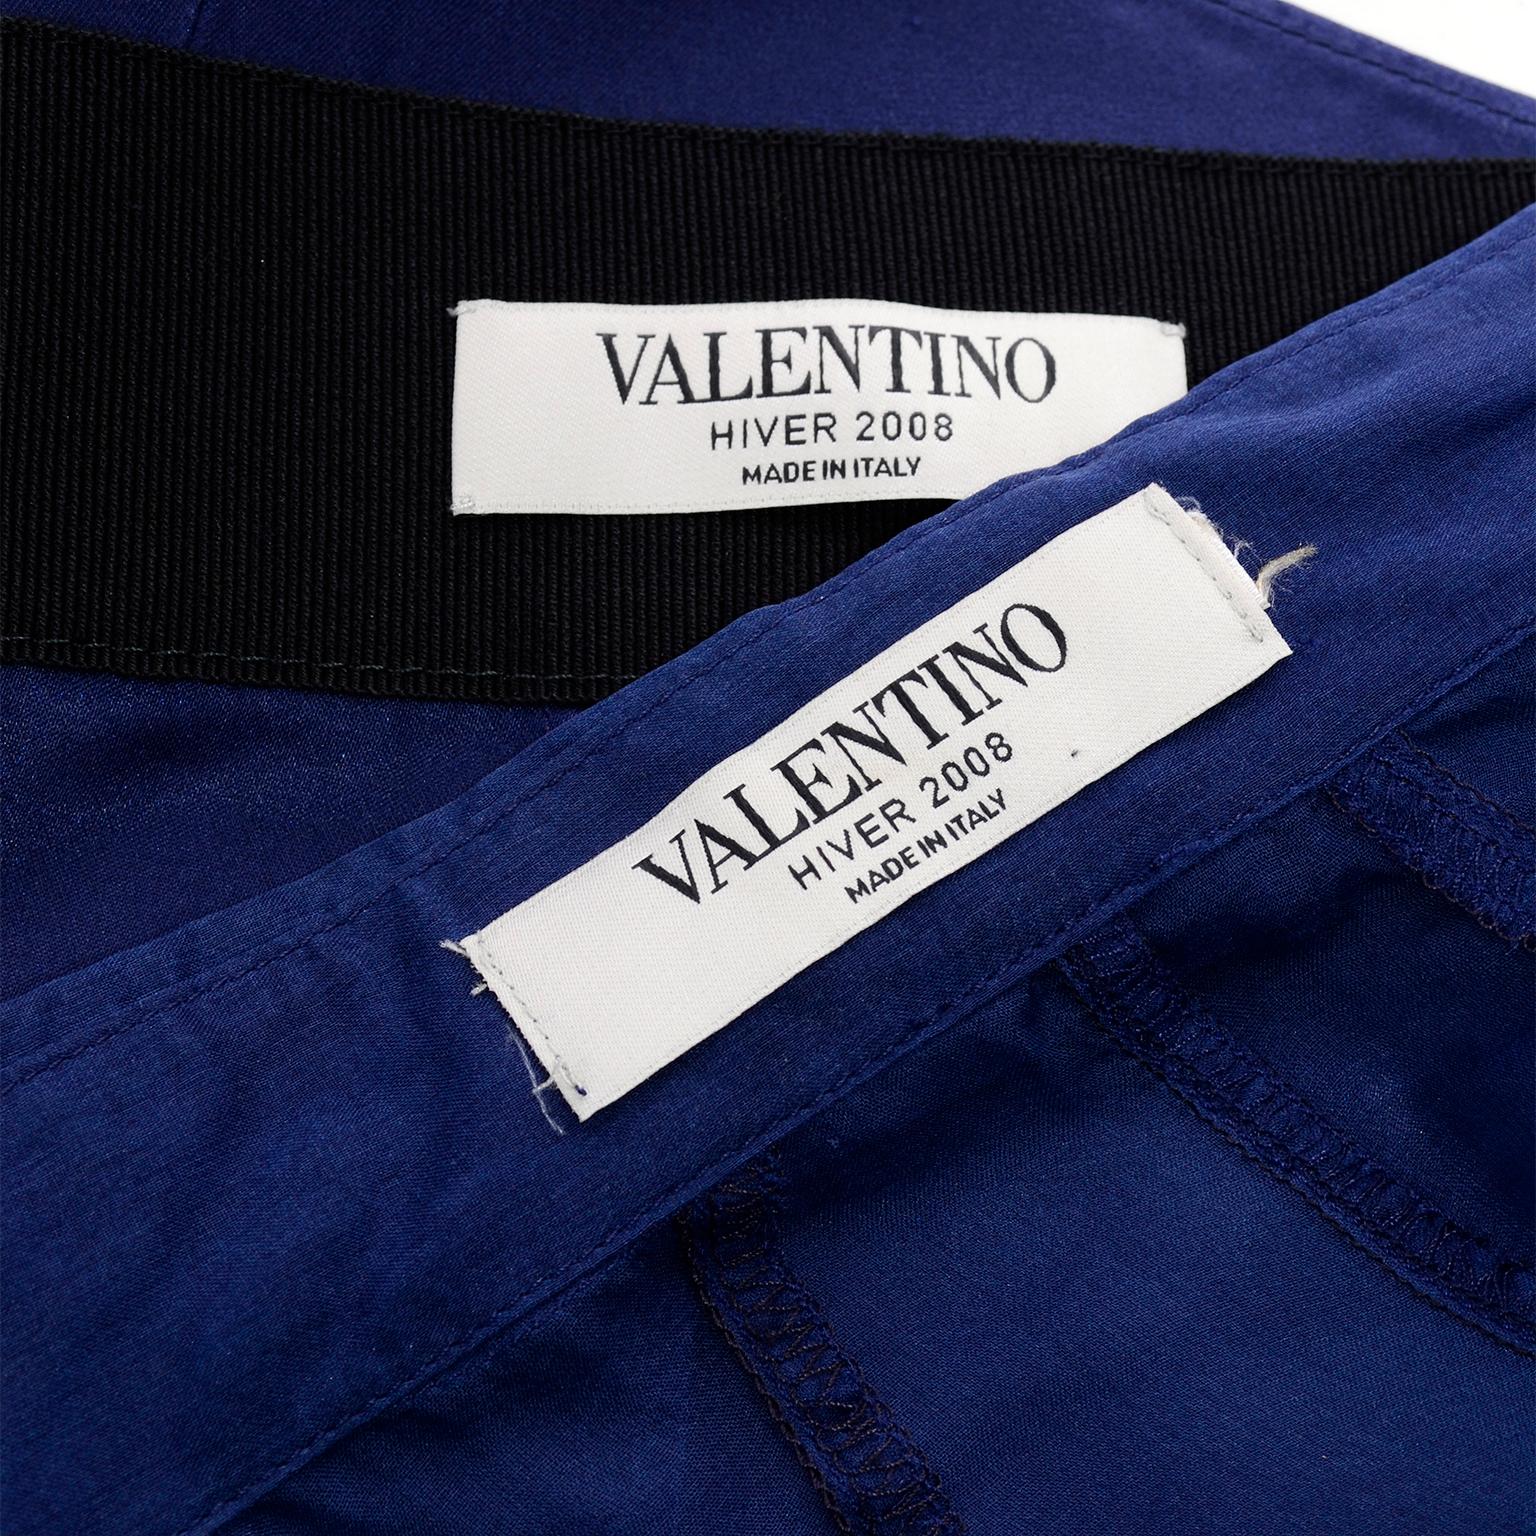 Valentino Fall Winter 2008 Runway Sheer Blouse and Skirt in Blue Silk ...